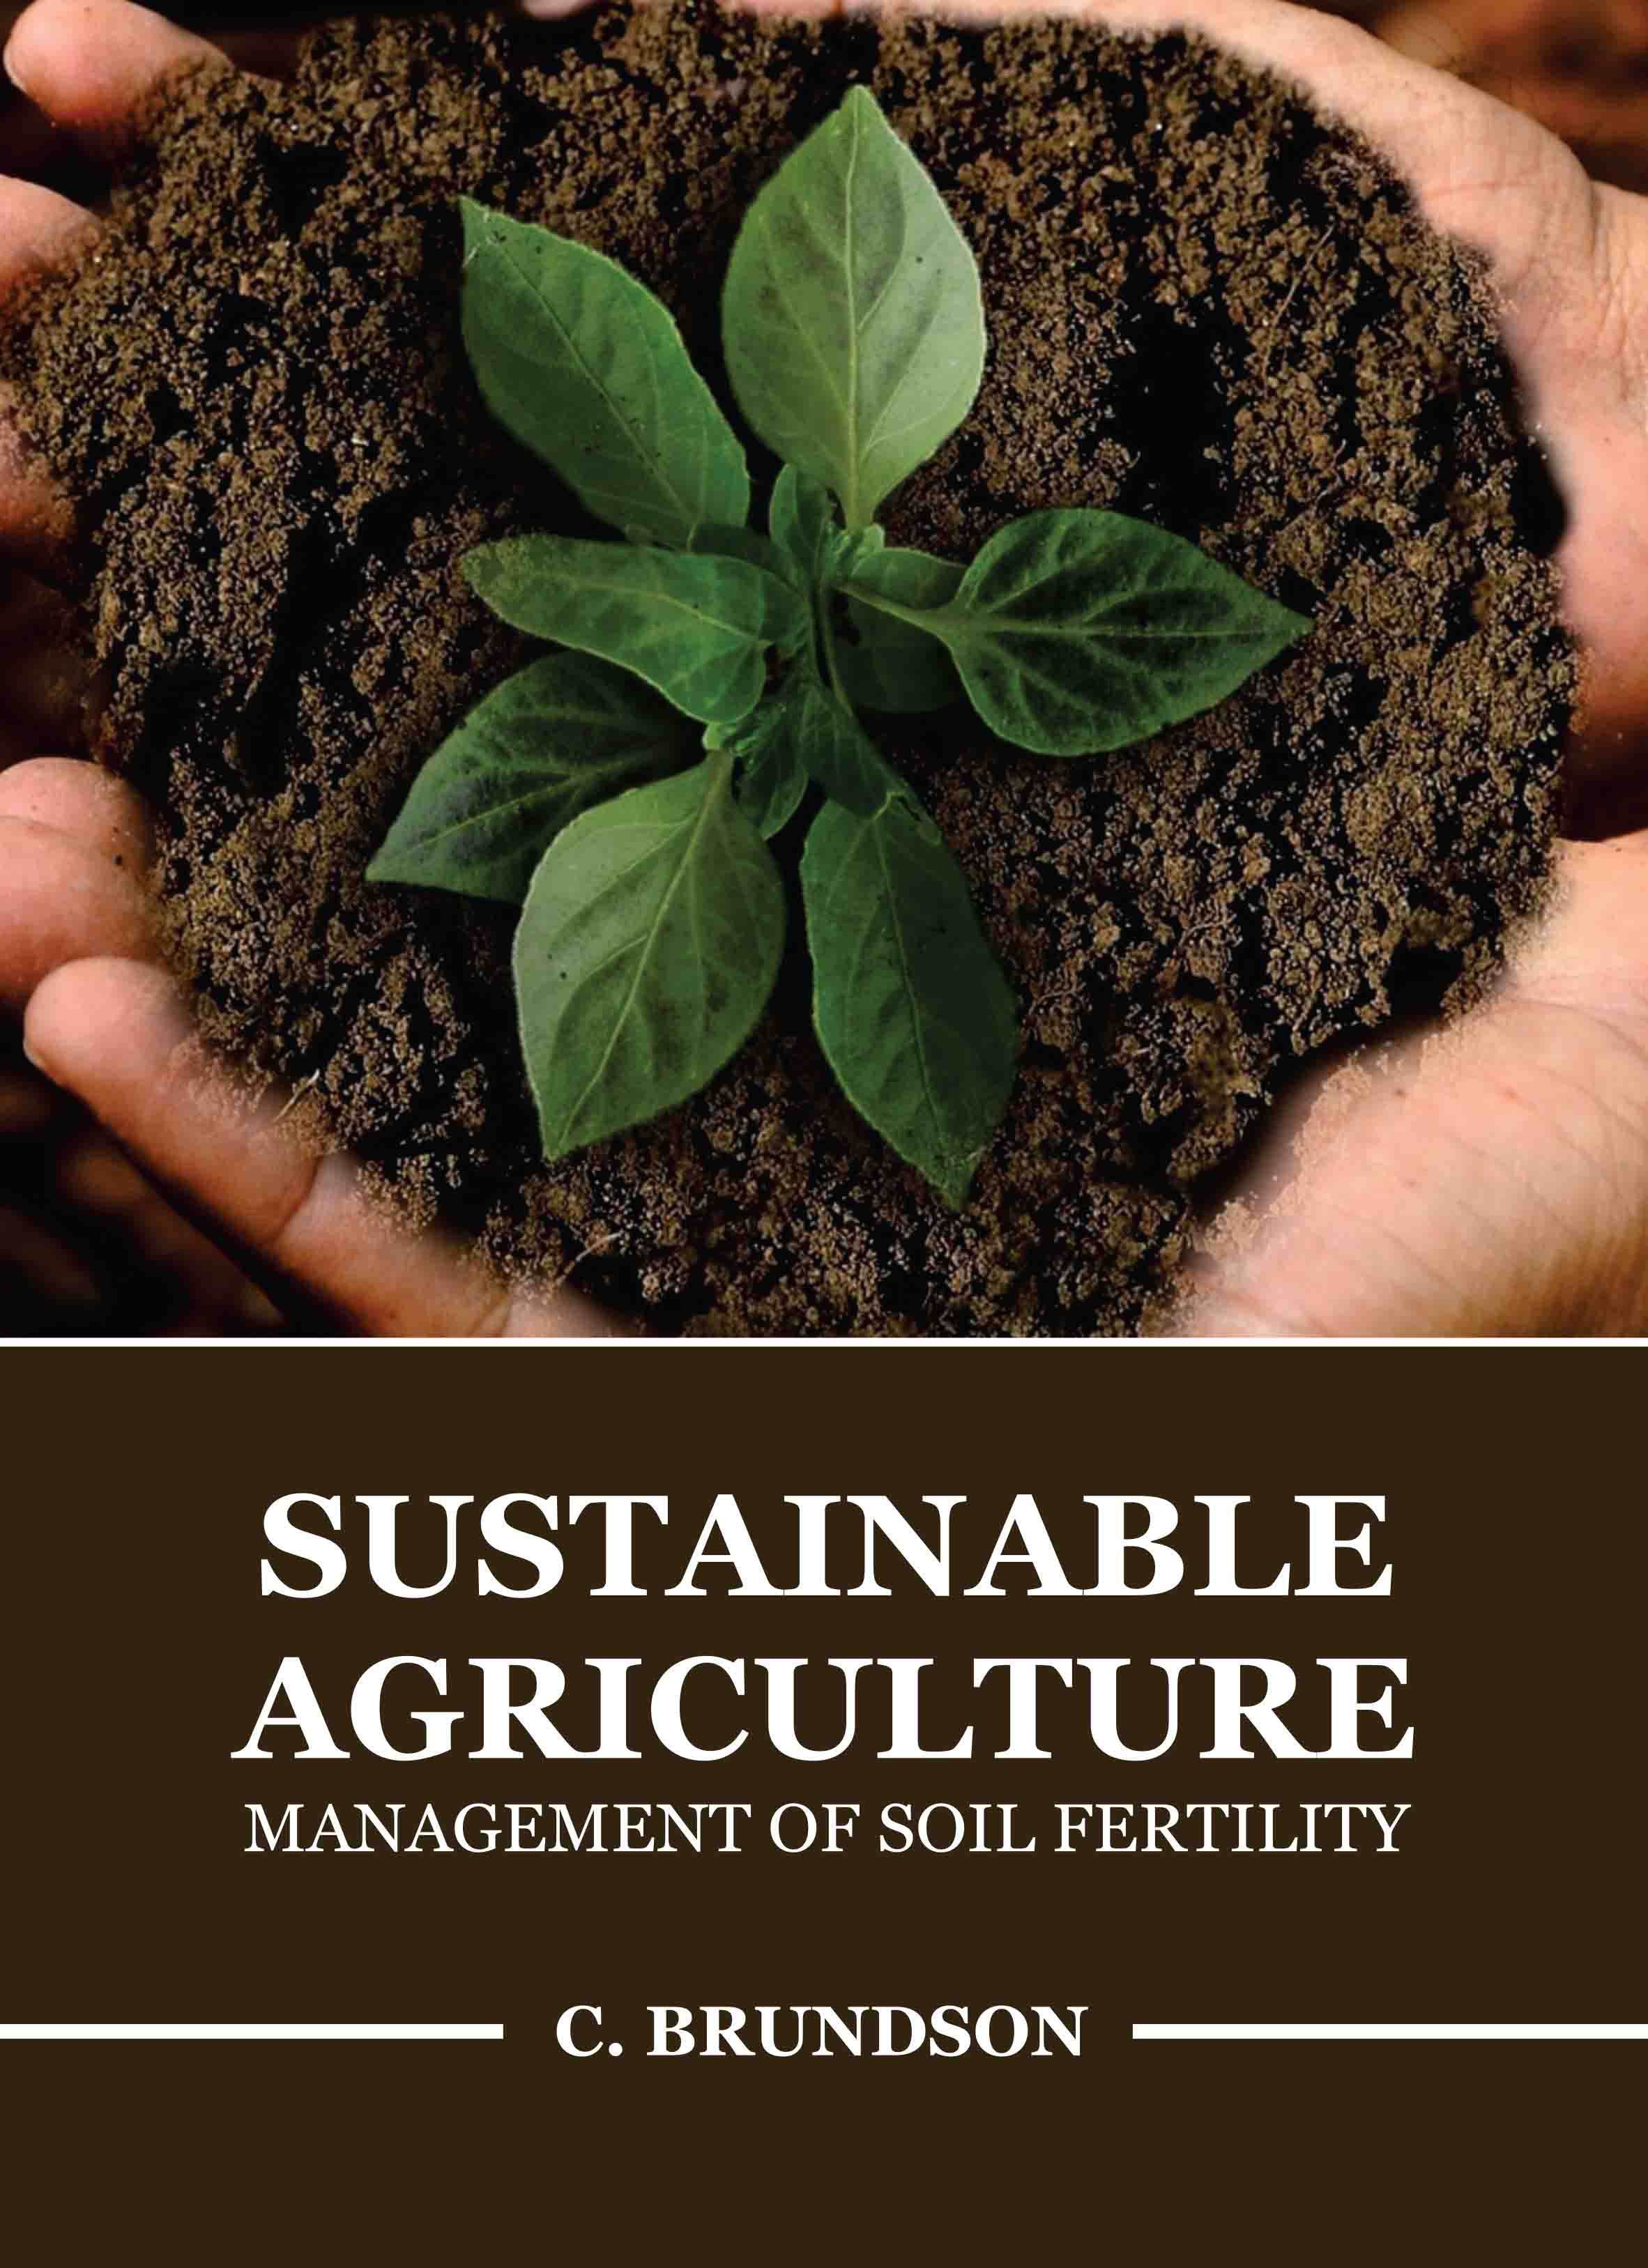 Sustainable Agriculture: Management of Soil Fertility